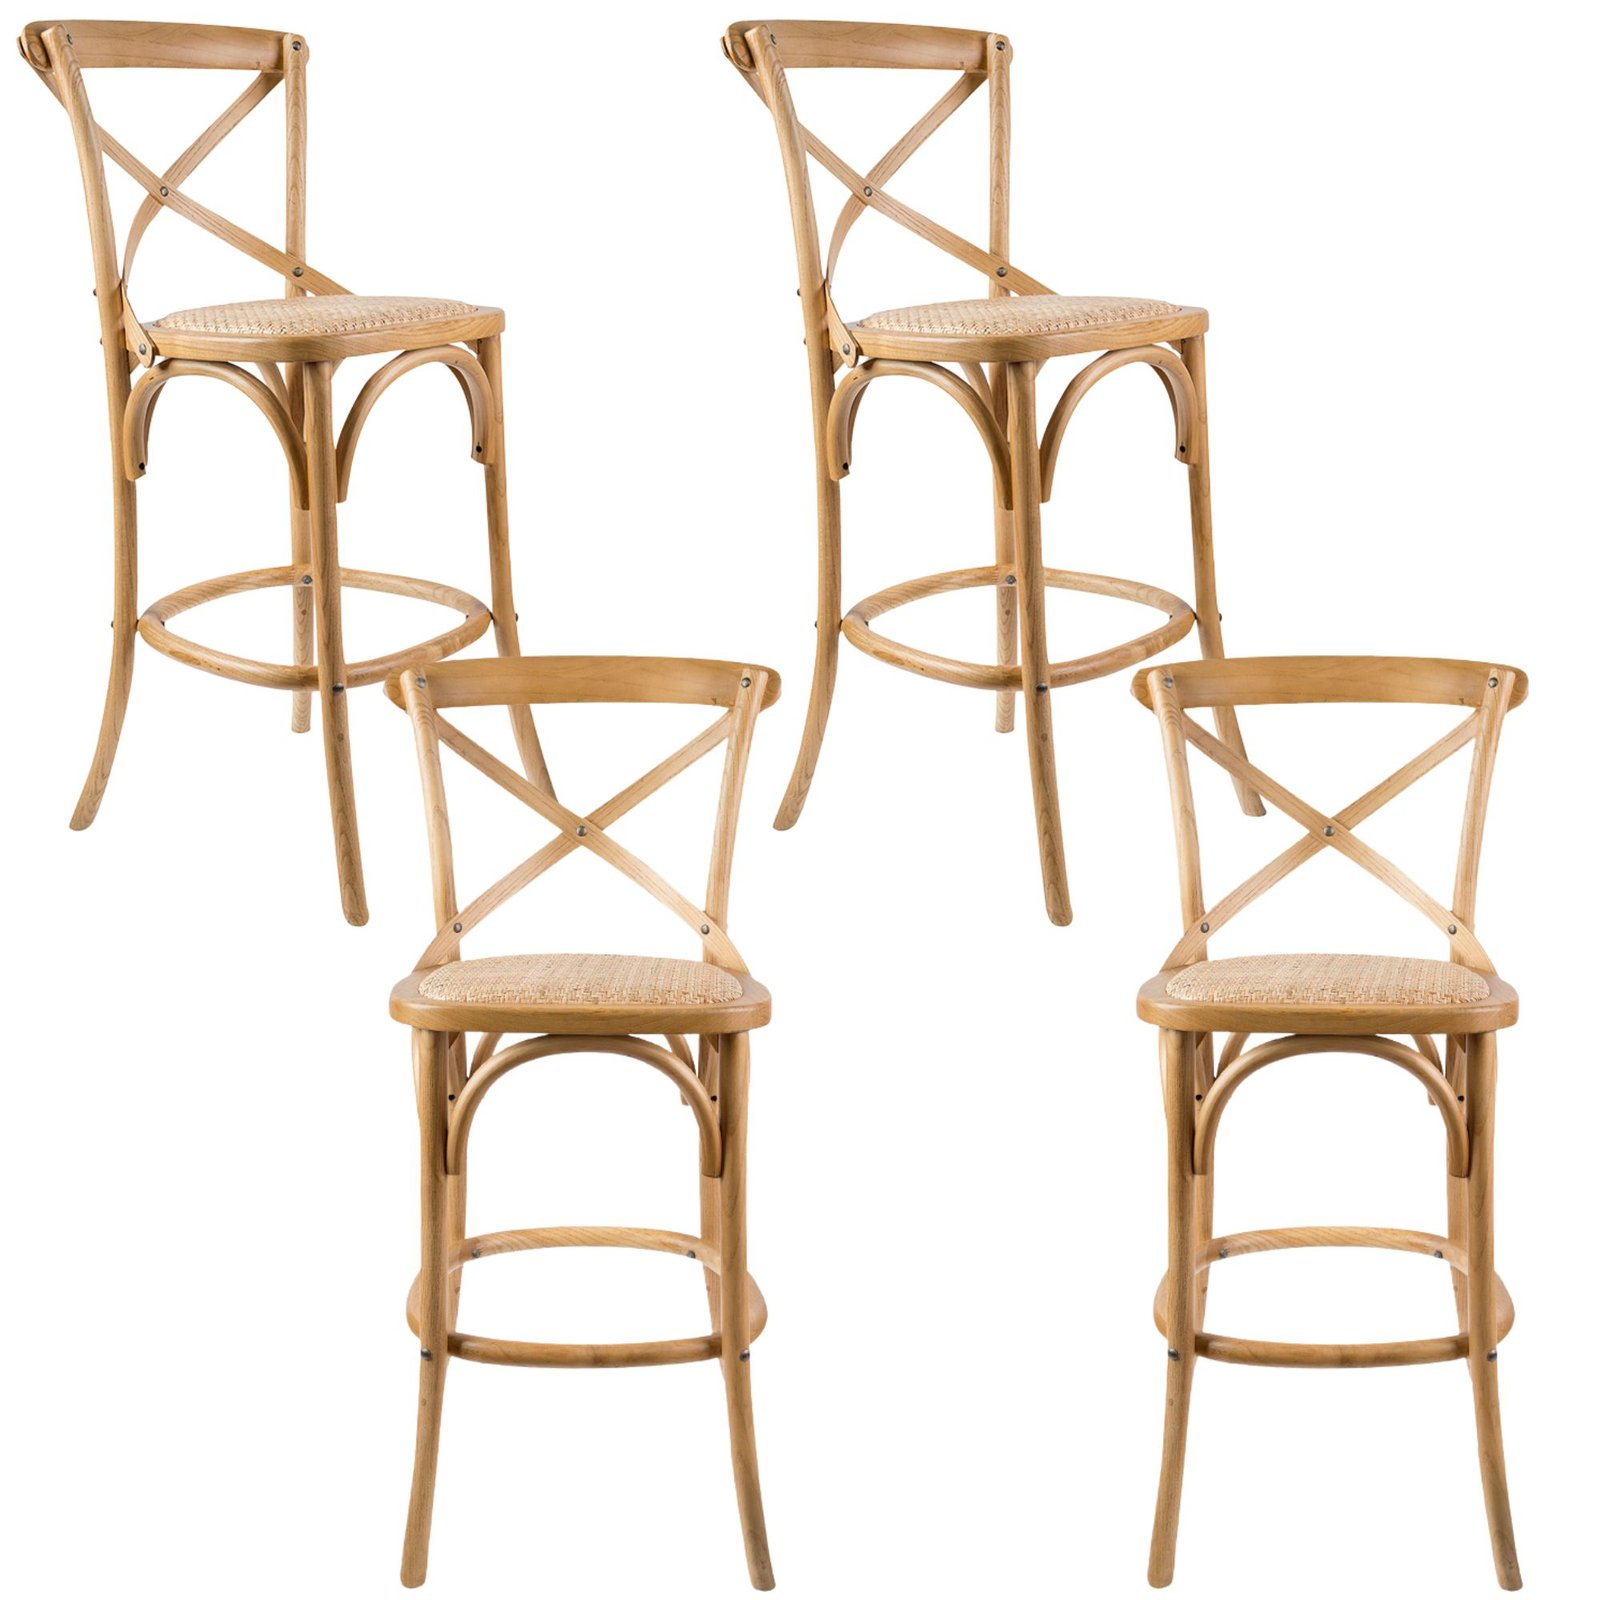 Aster 4pc Crossback Bar Stools Dining Chair Solid Birch Timber Rattan Seat – Oak